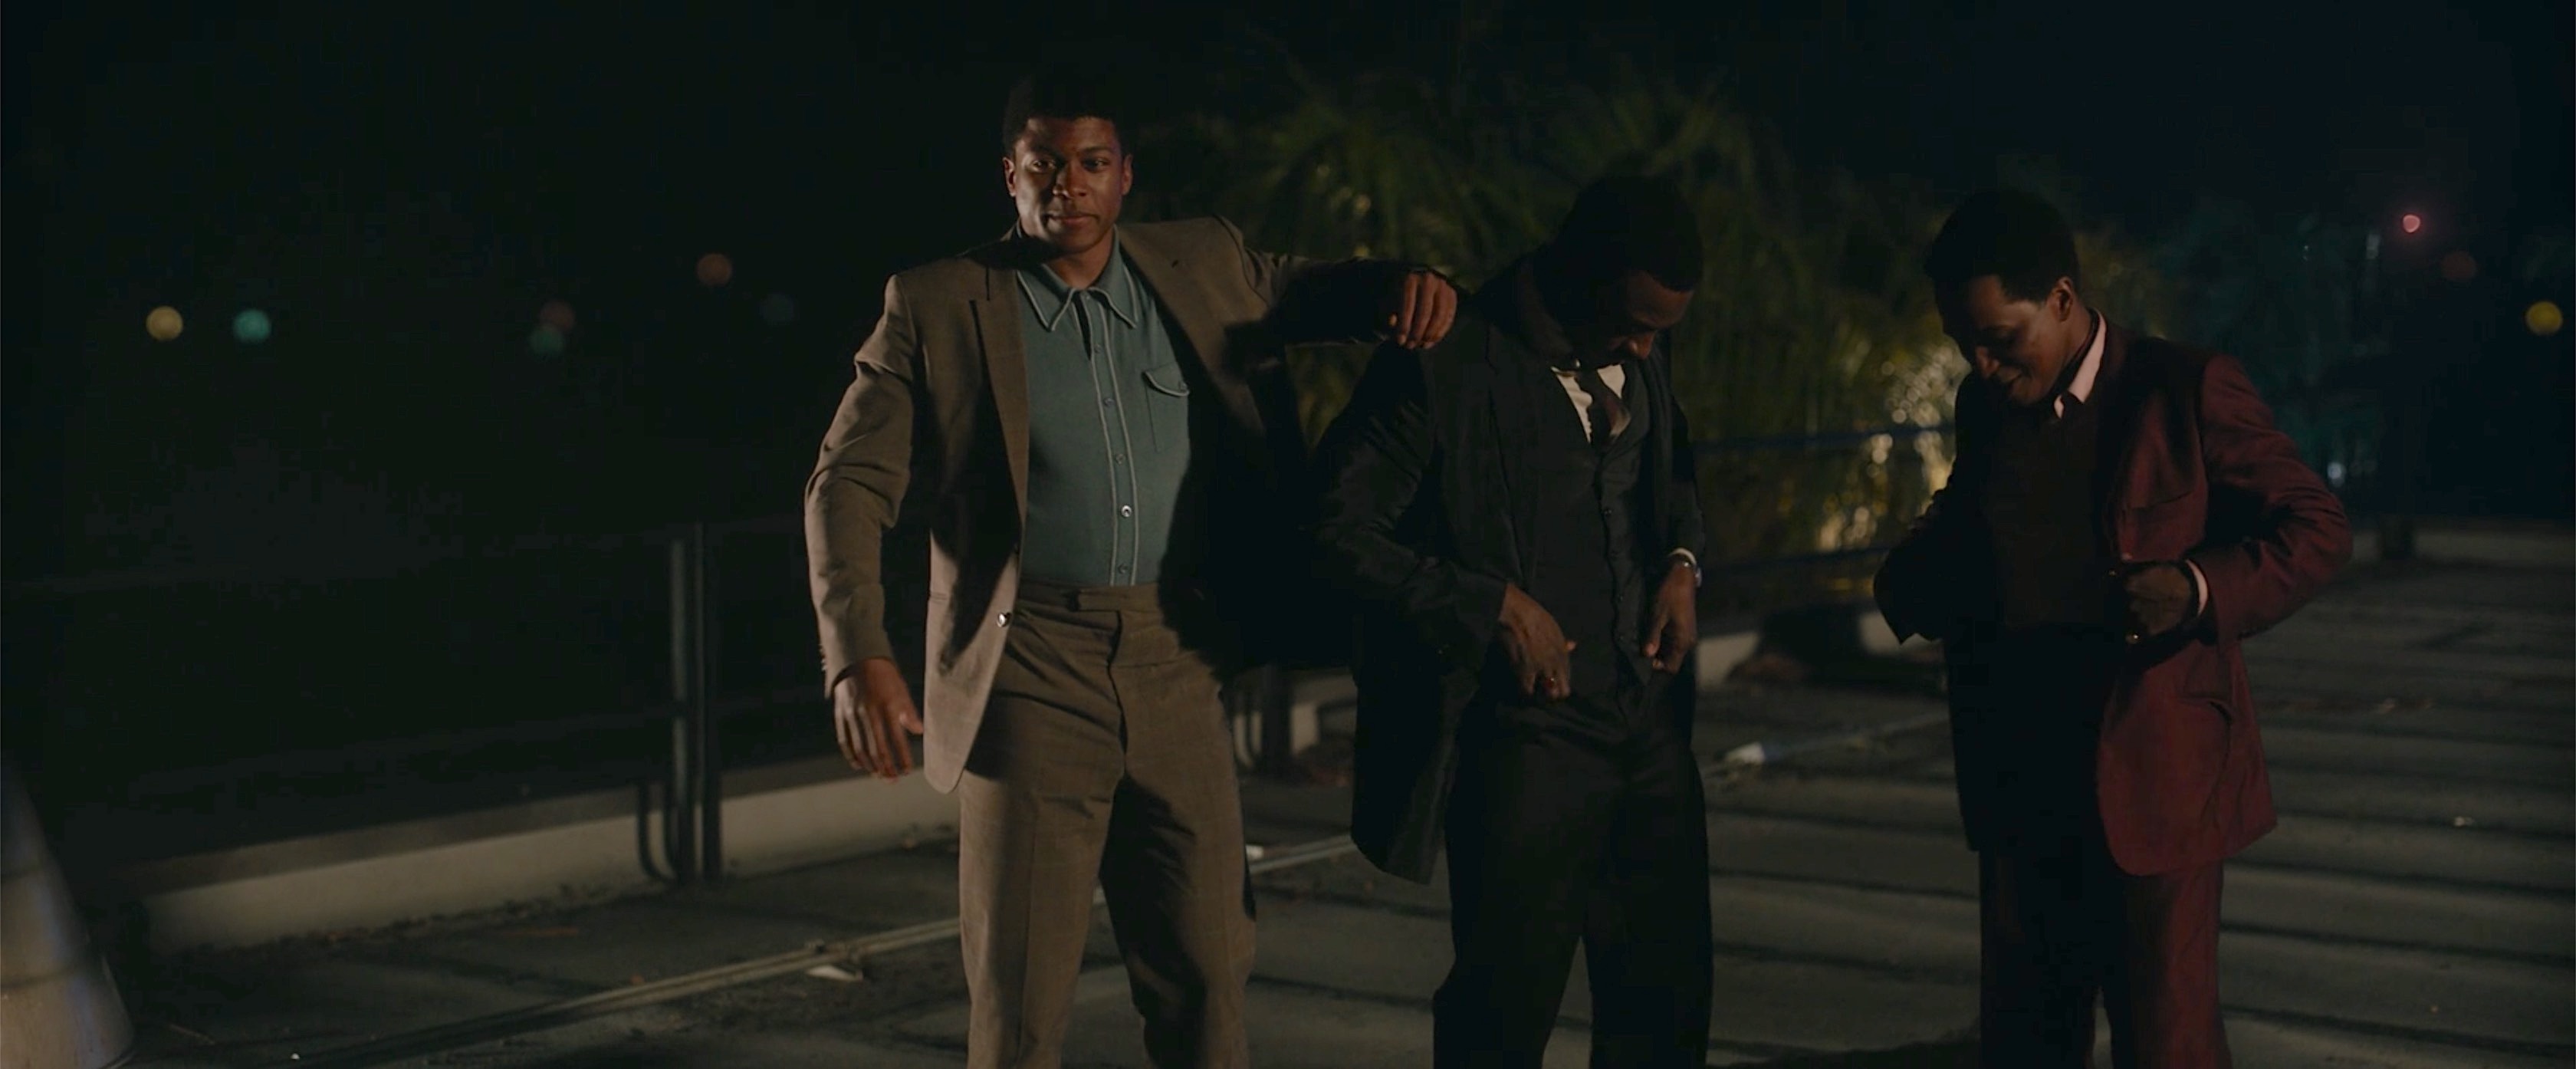 One Night in Miami (Movies), Cassius Clay's suit, Fashion style inspiration, Bamf style tribute, 3360x1400 Dual Screen Desktop